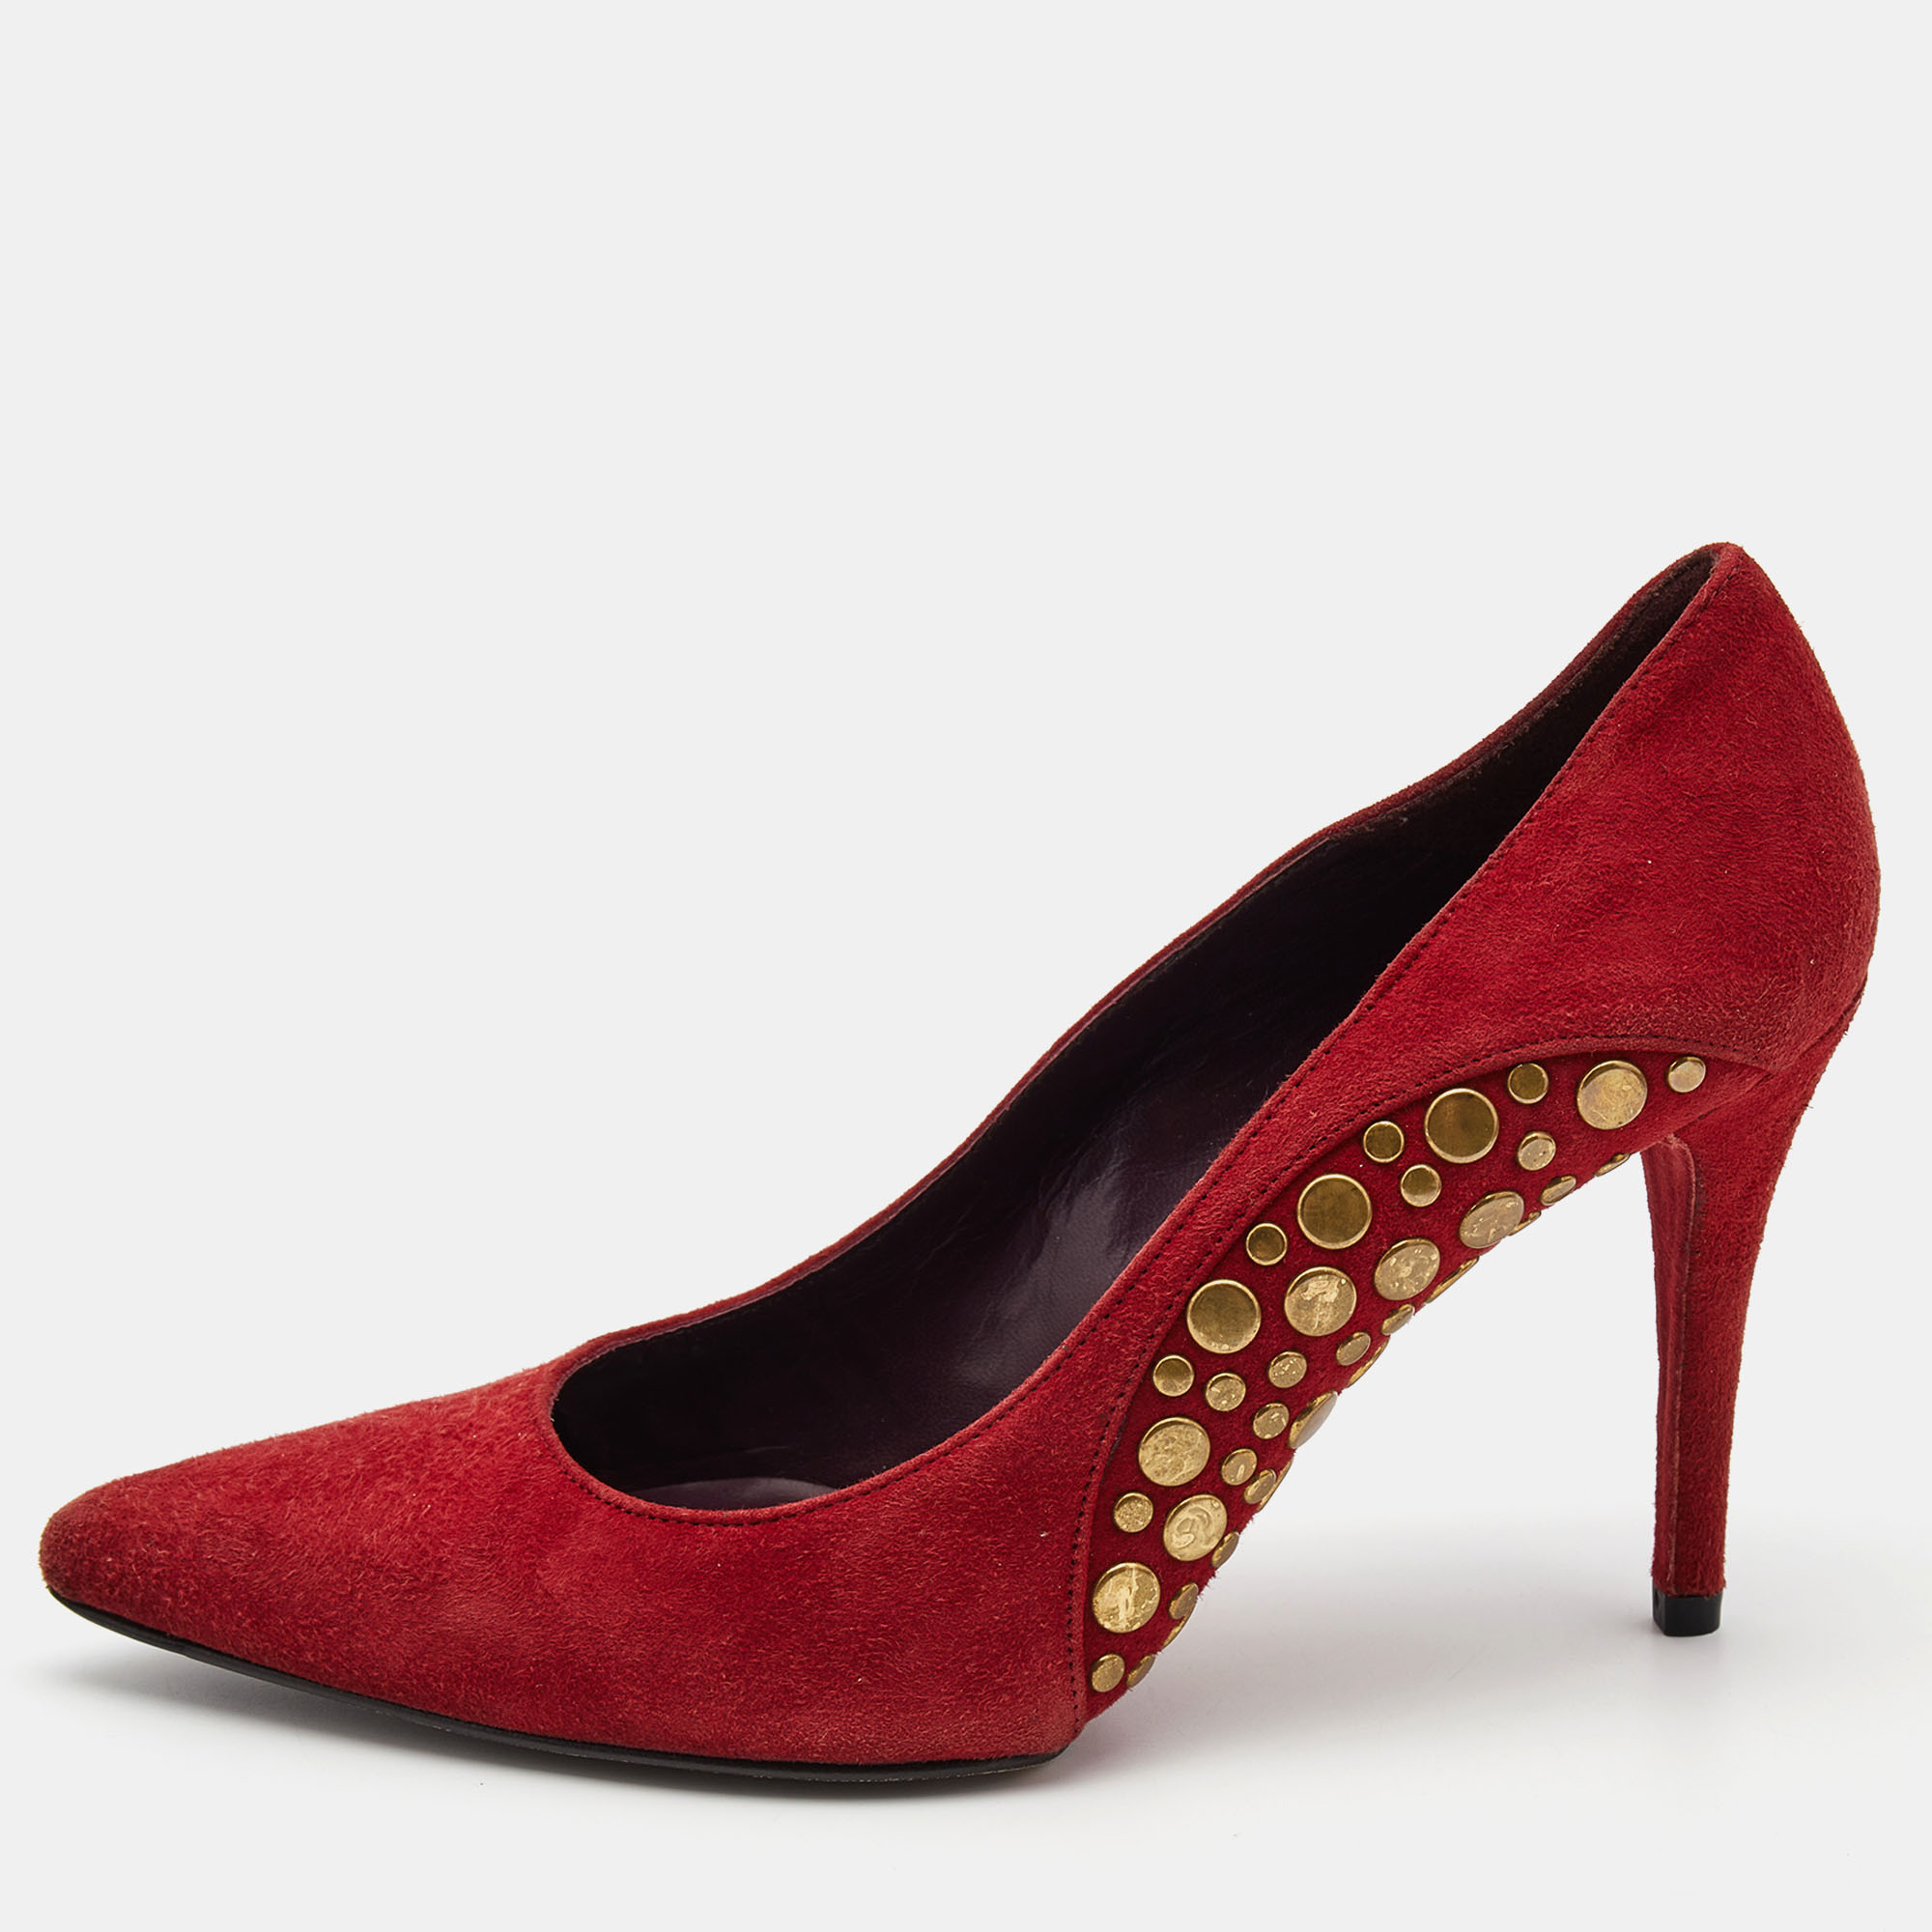 Pre-owned Stuart Weitzman Dark Red Suede Studded Pumps Size 37